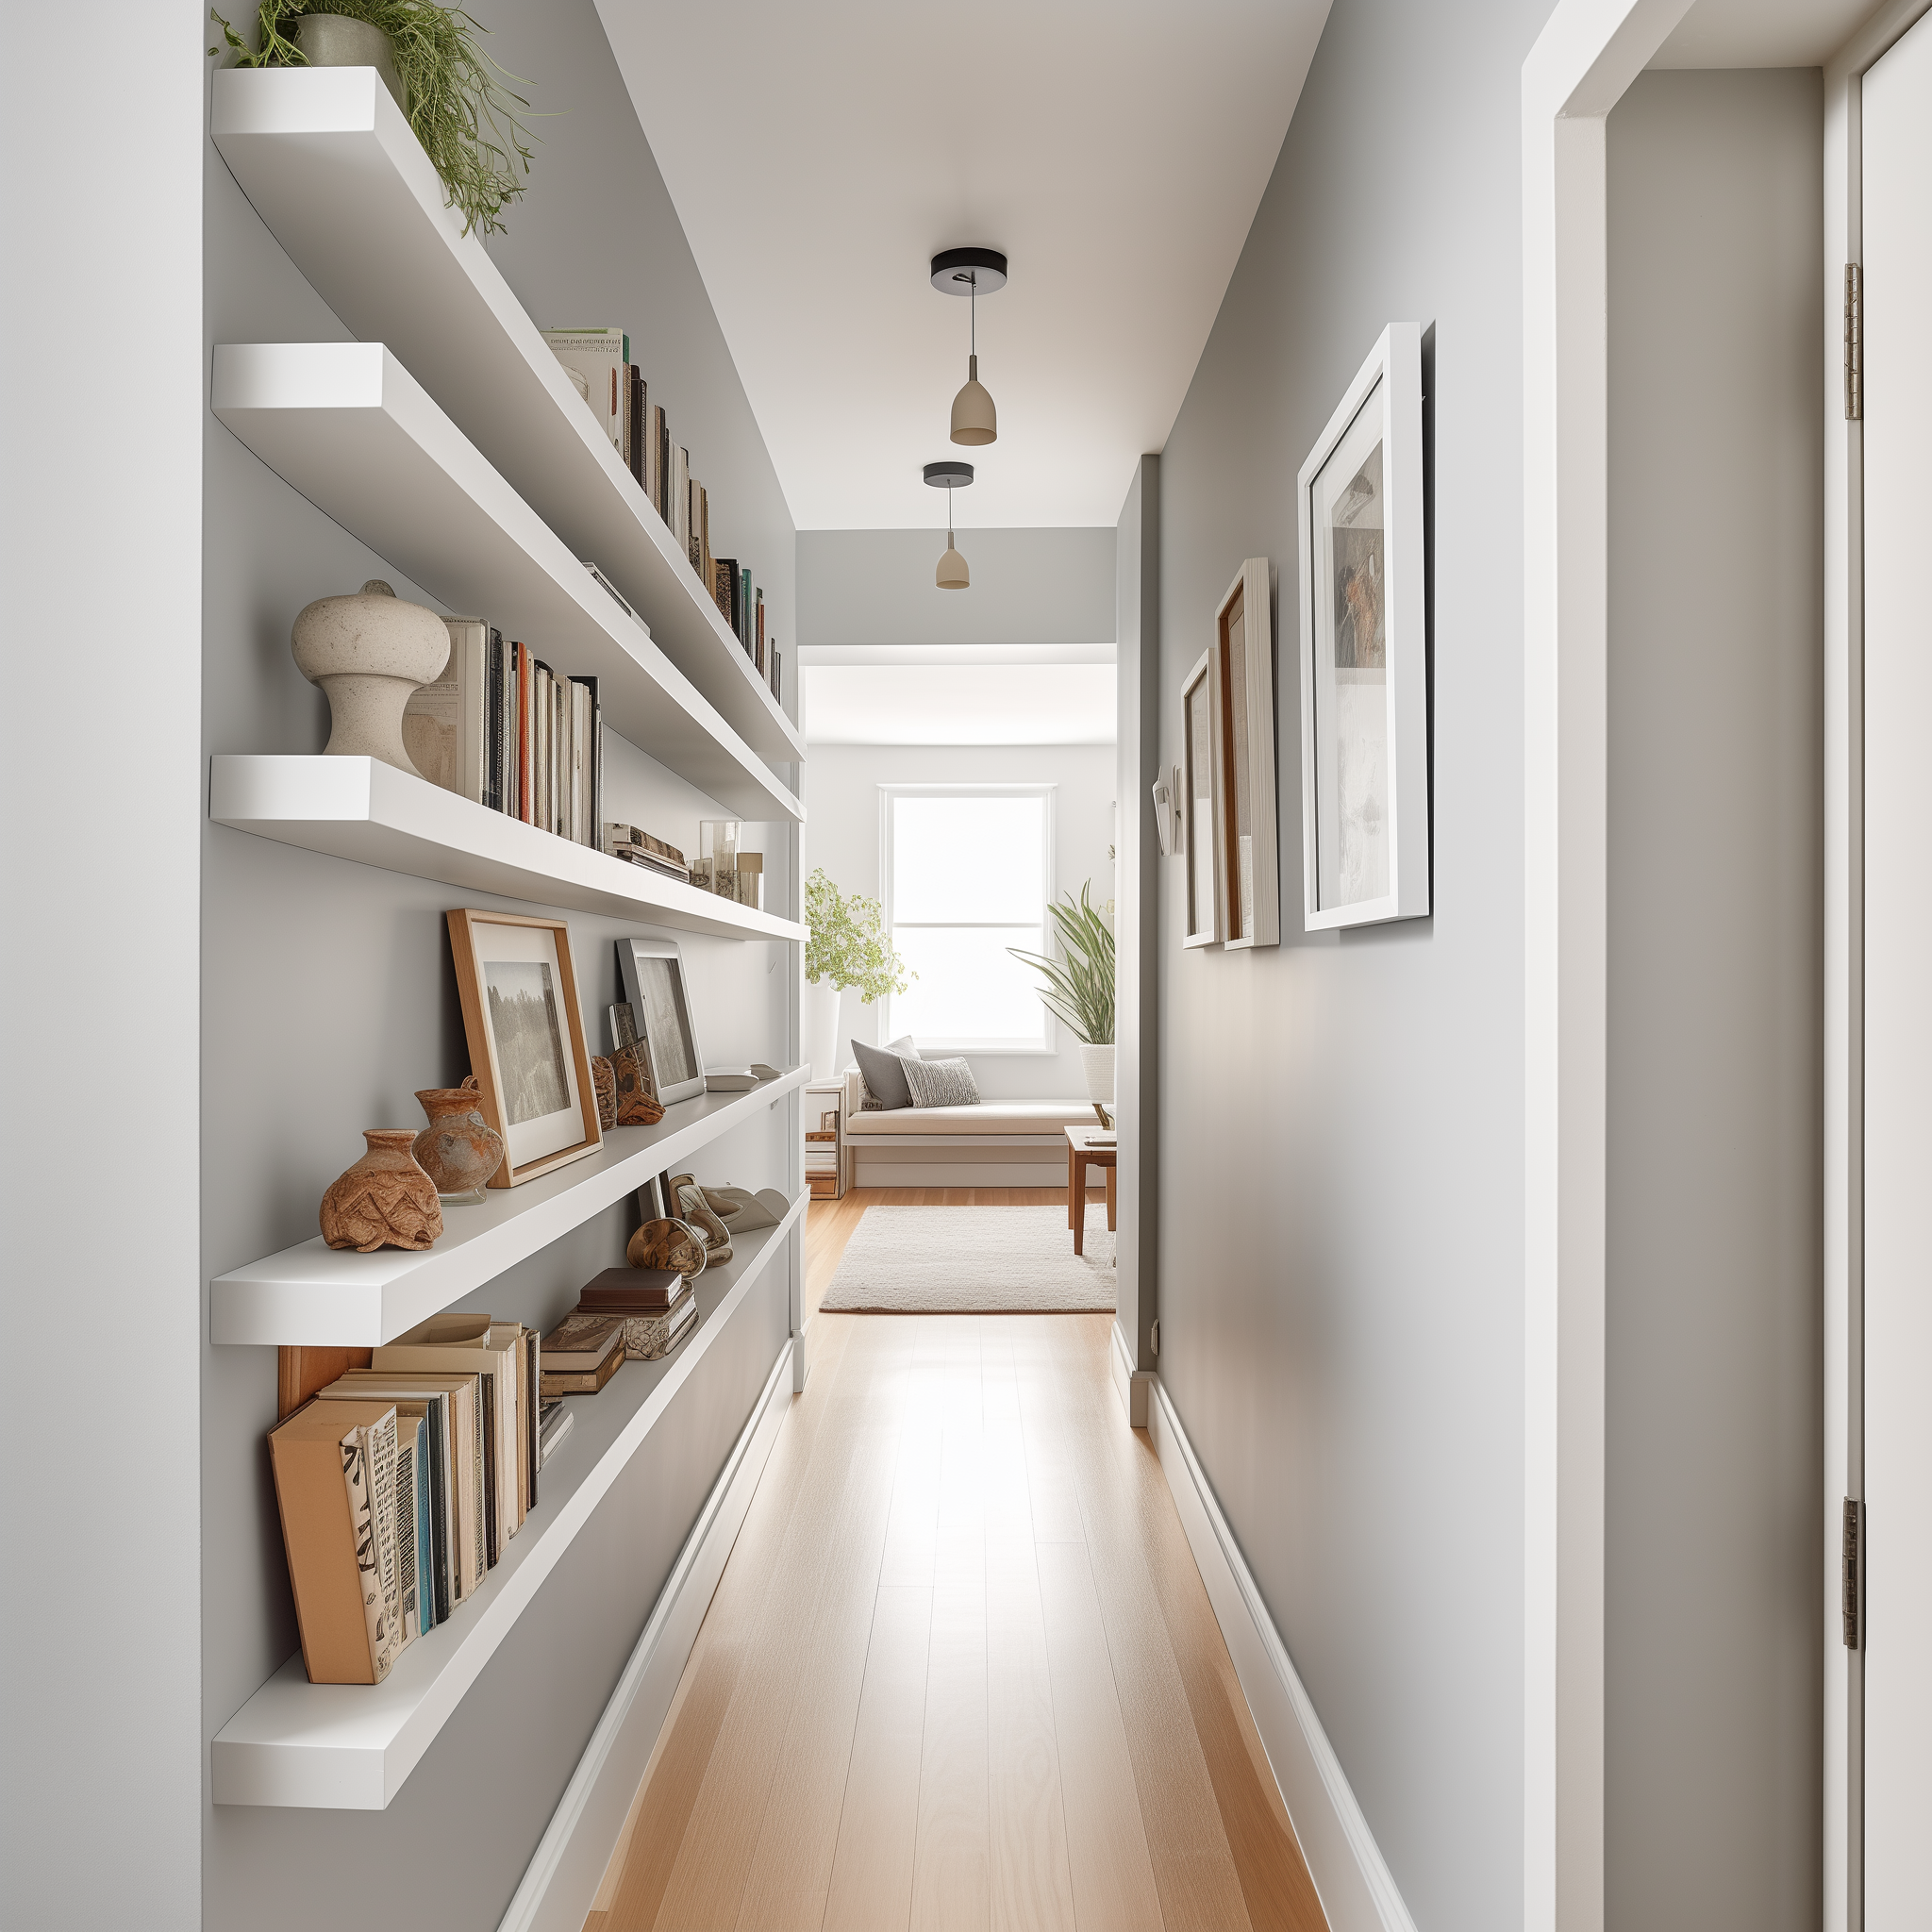 Hallway with built in shelves